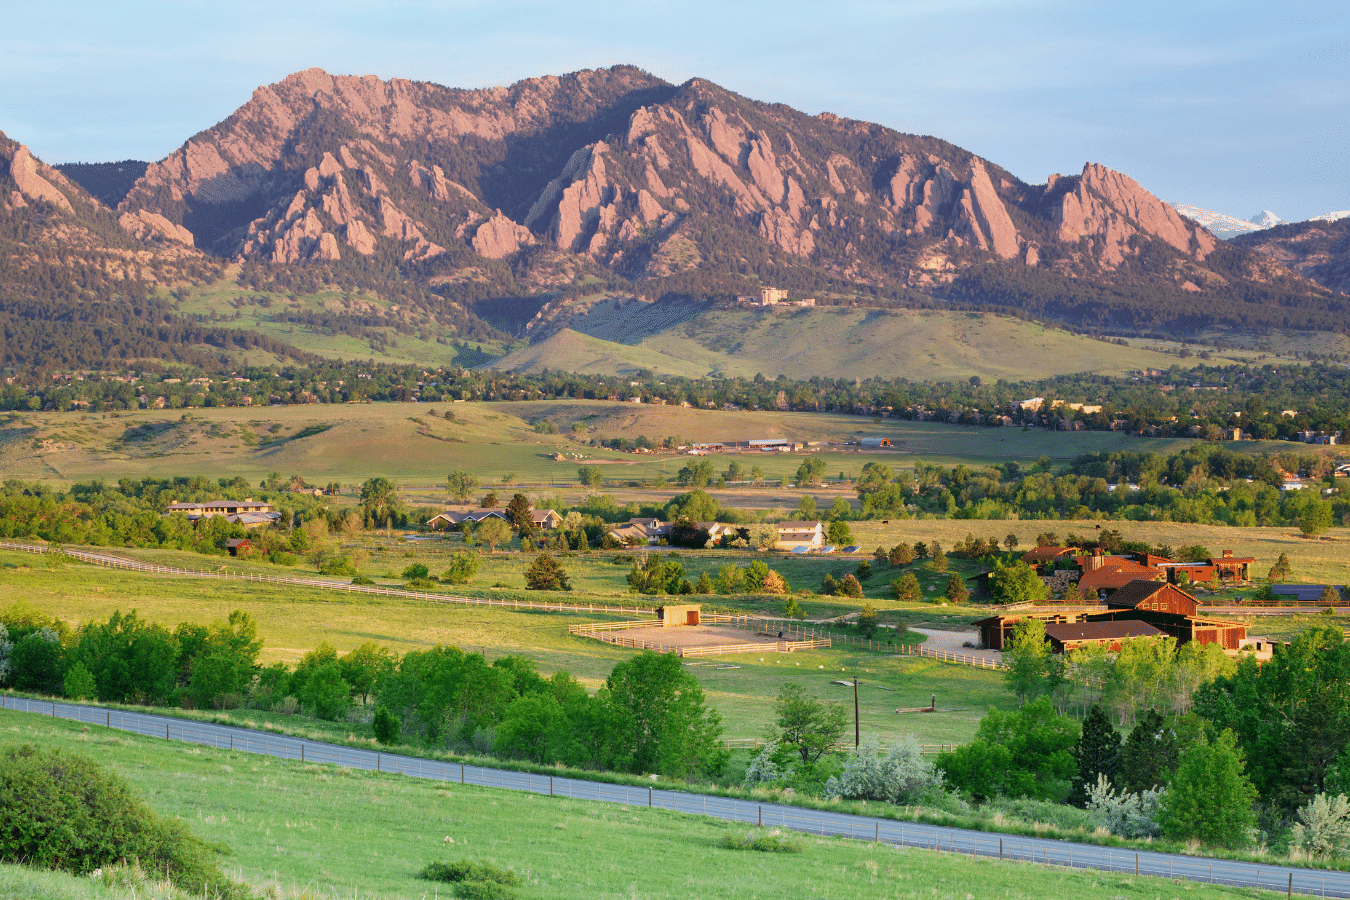 Boulder flatirons in the background with a farm in the foreground on a beautiful day